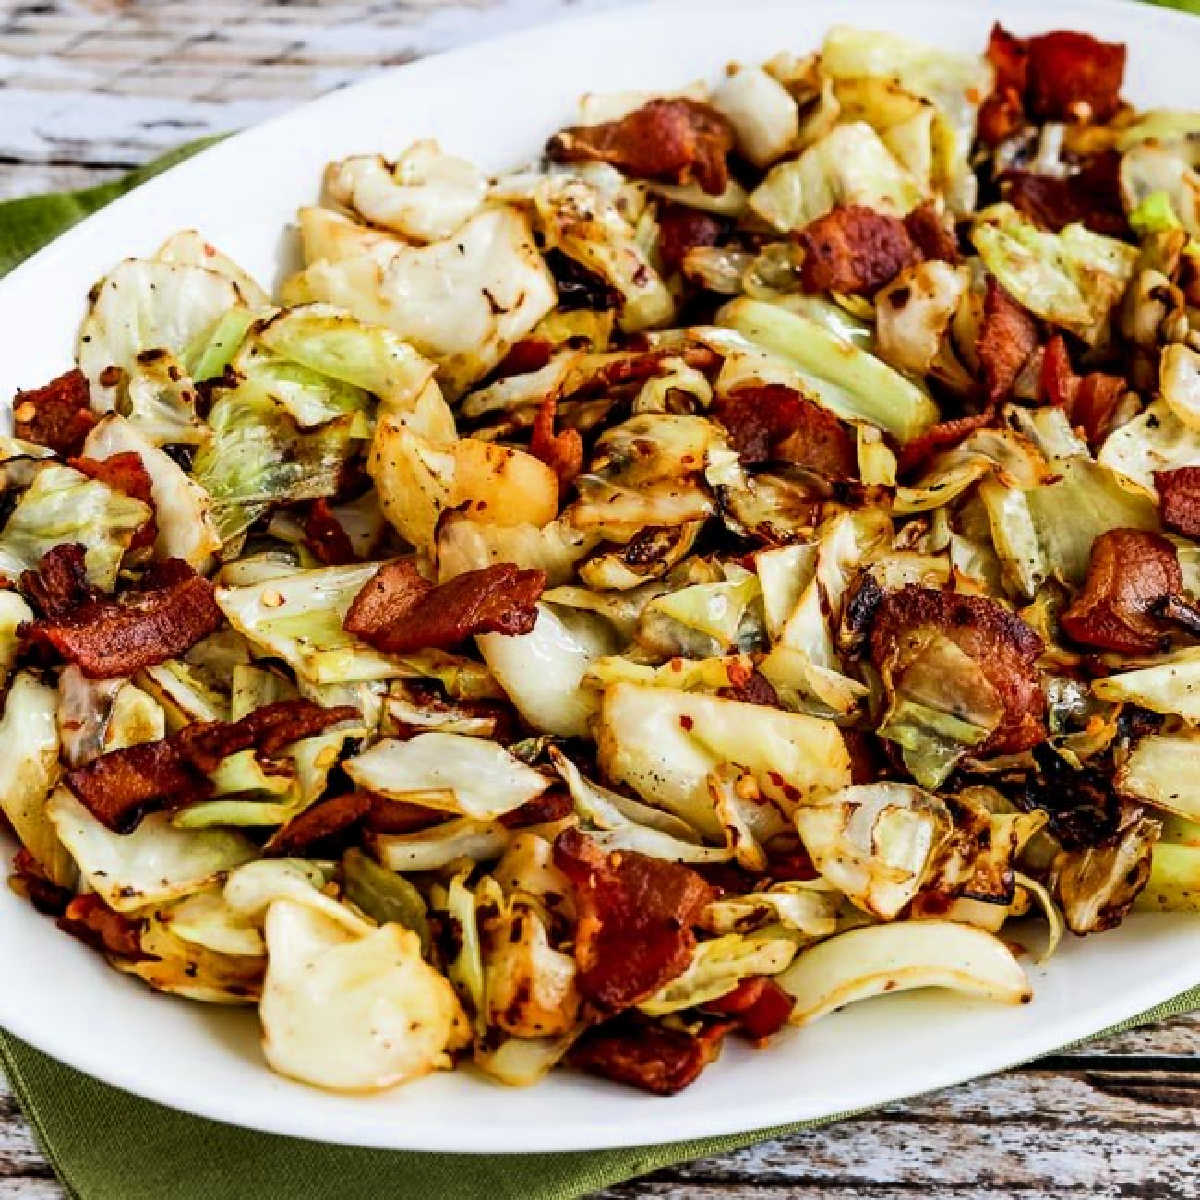 A square image of fried cabbage with bacon is displayed on a serving plate.